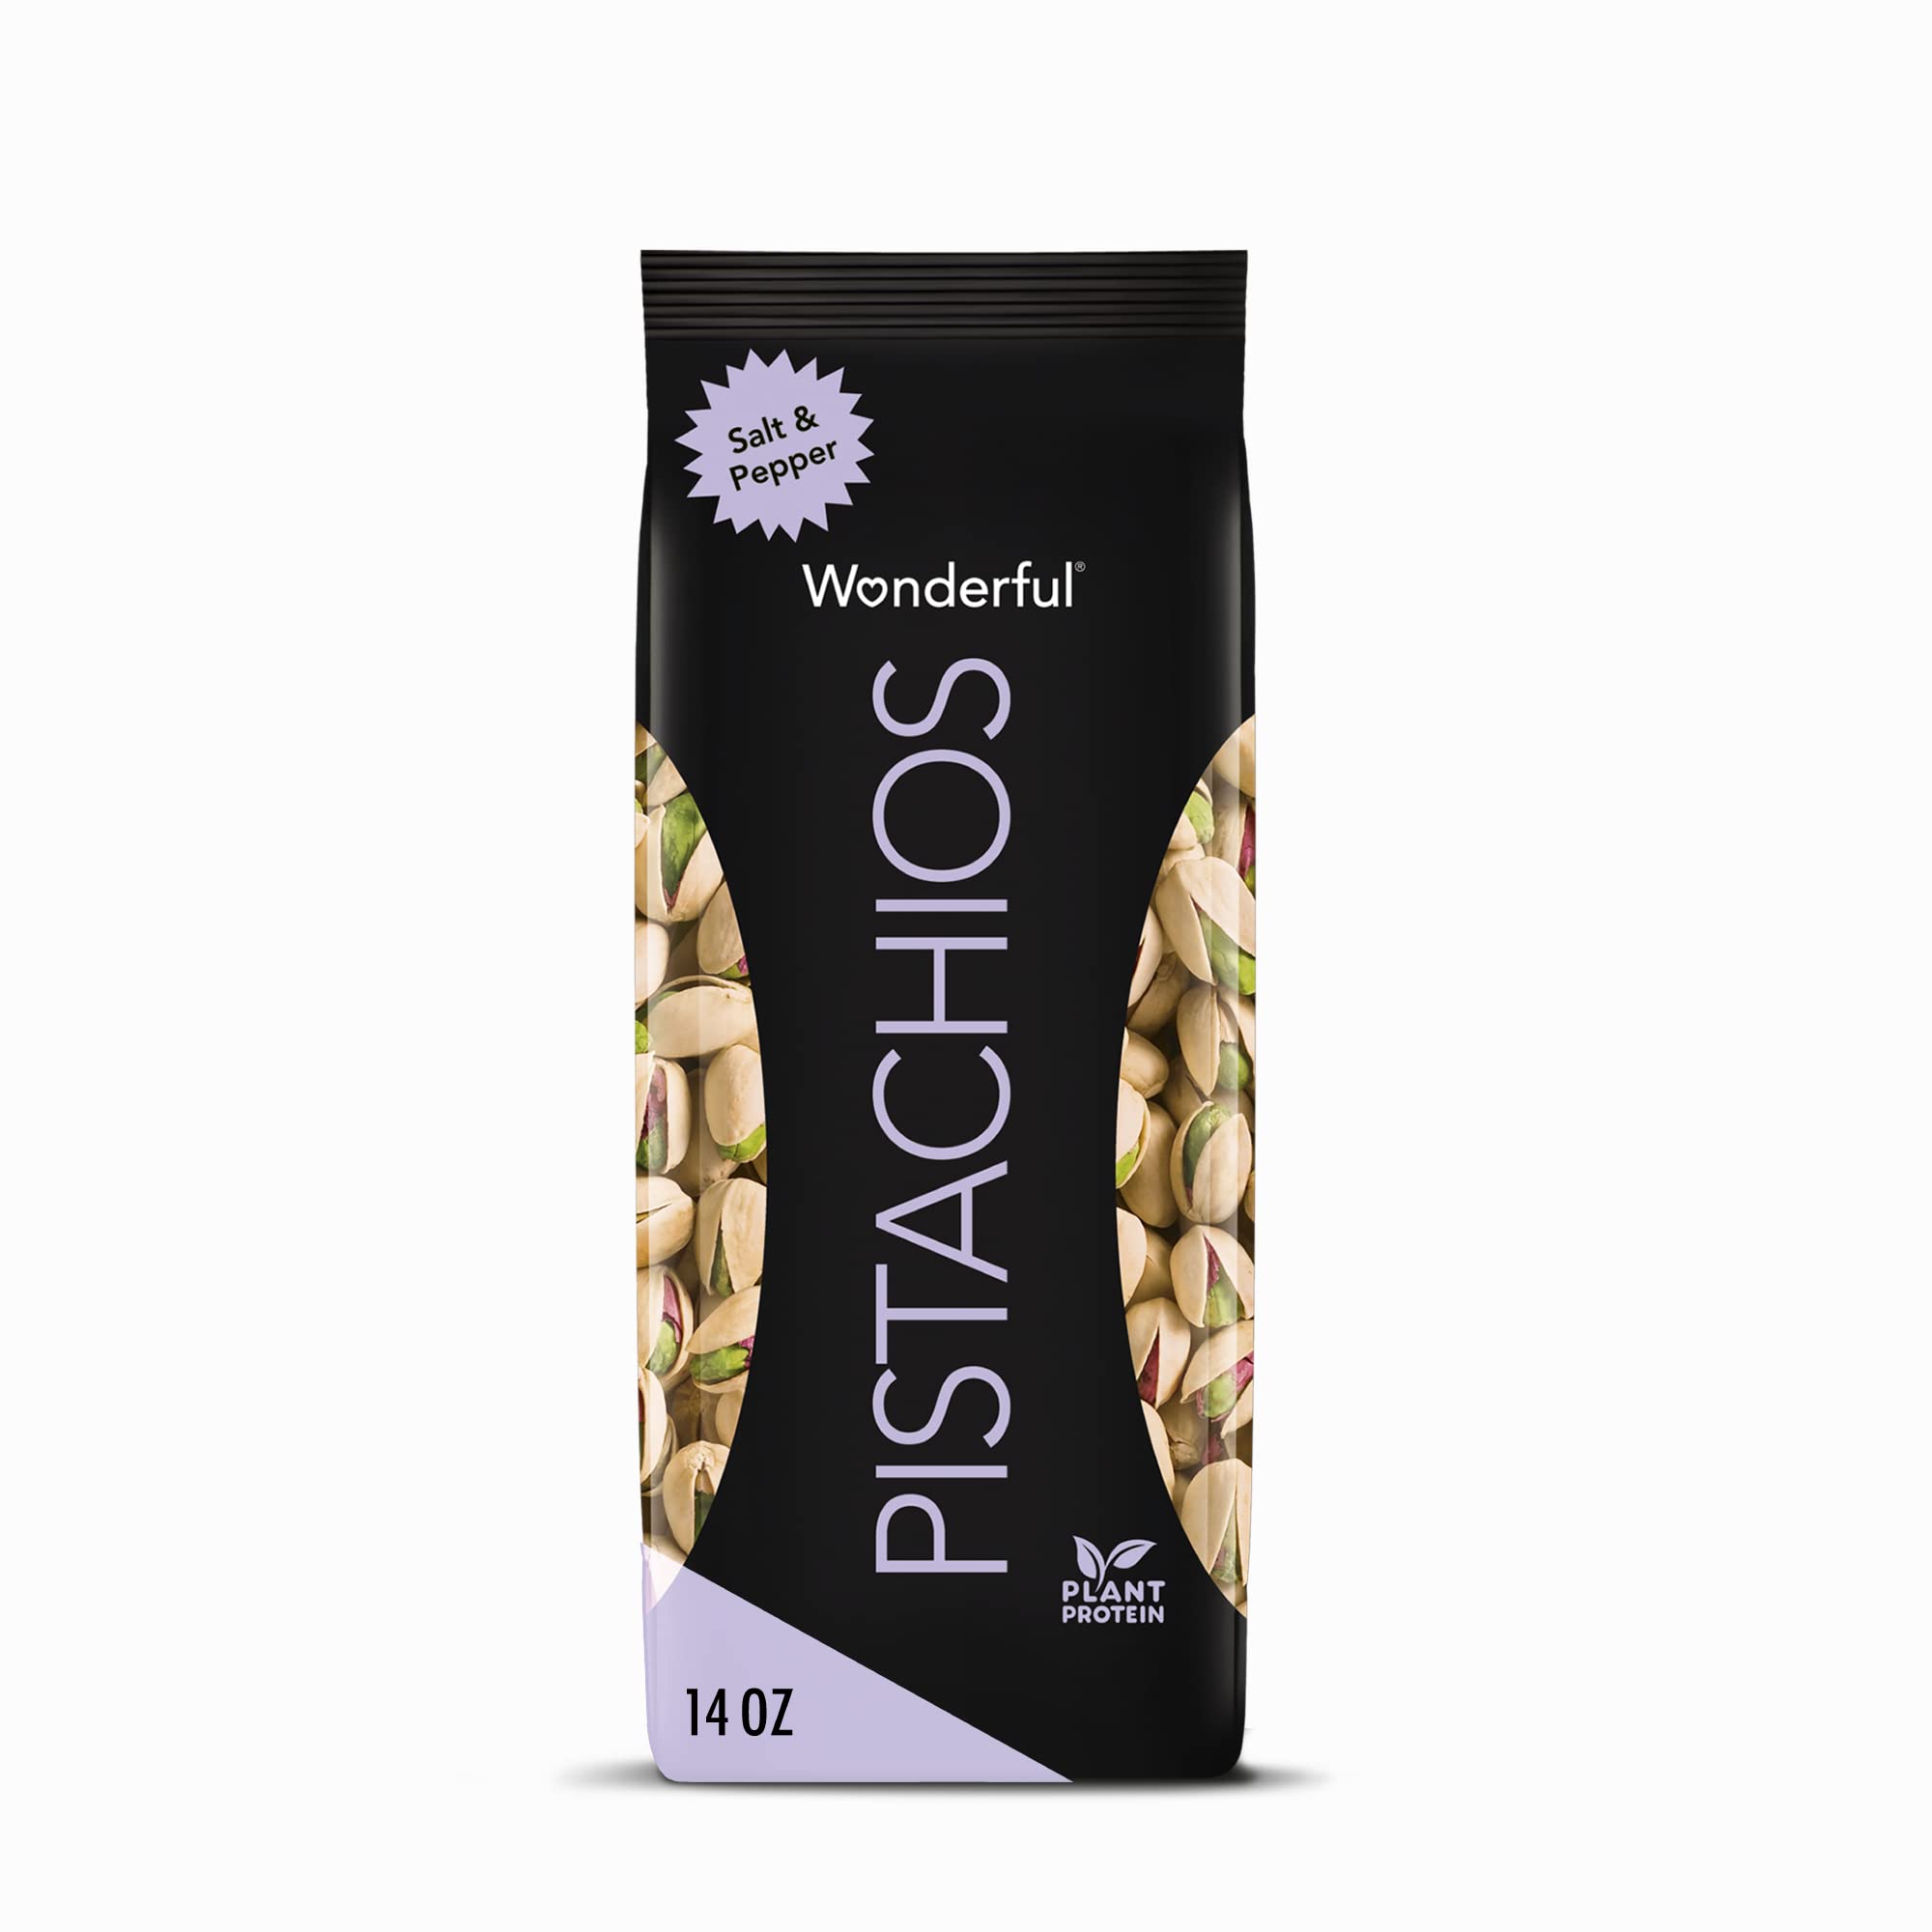 16-Oz Wonderful Pistachios (Salt & Pepper or Sweet Chili, In Shell) $4.95 w/ S&S + Free Shipping w/ Prime or on $25+